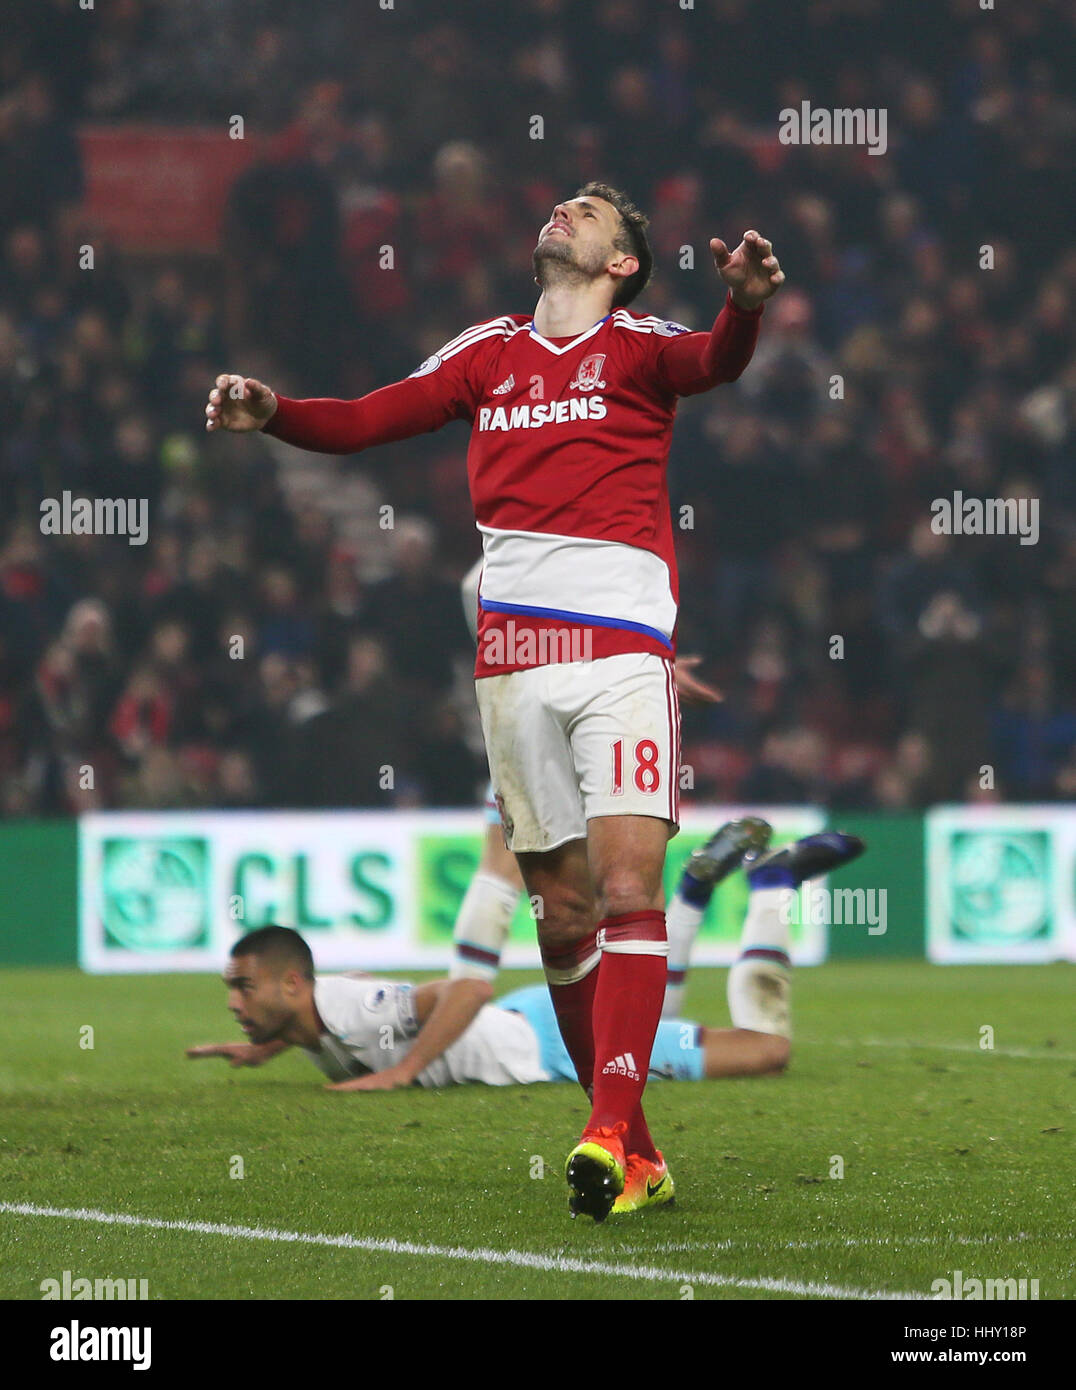 Middlesbrough's Cristhian Stuani reacts after his shot goes over the crossbar during the Premier League match at the Riverside Stadium, Middlesbrough. Stock Photo